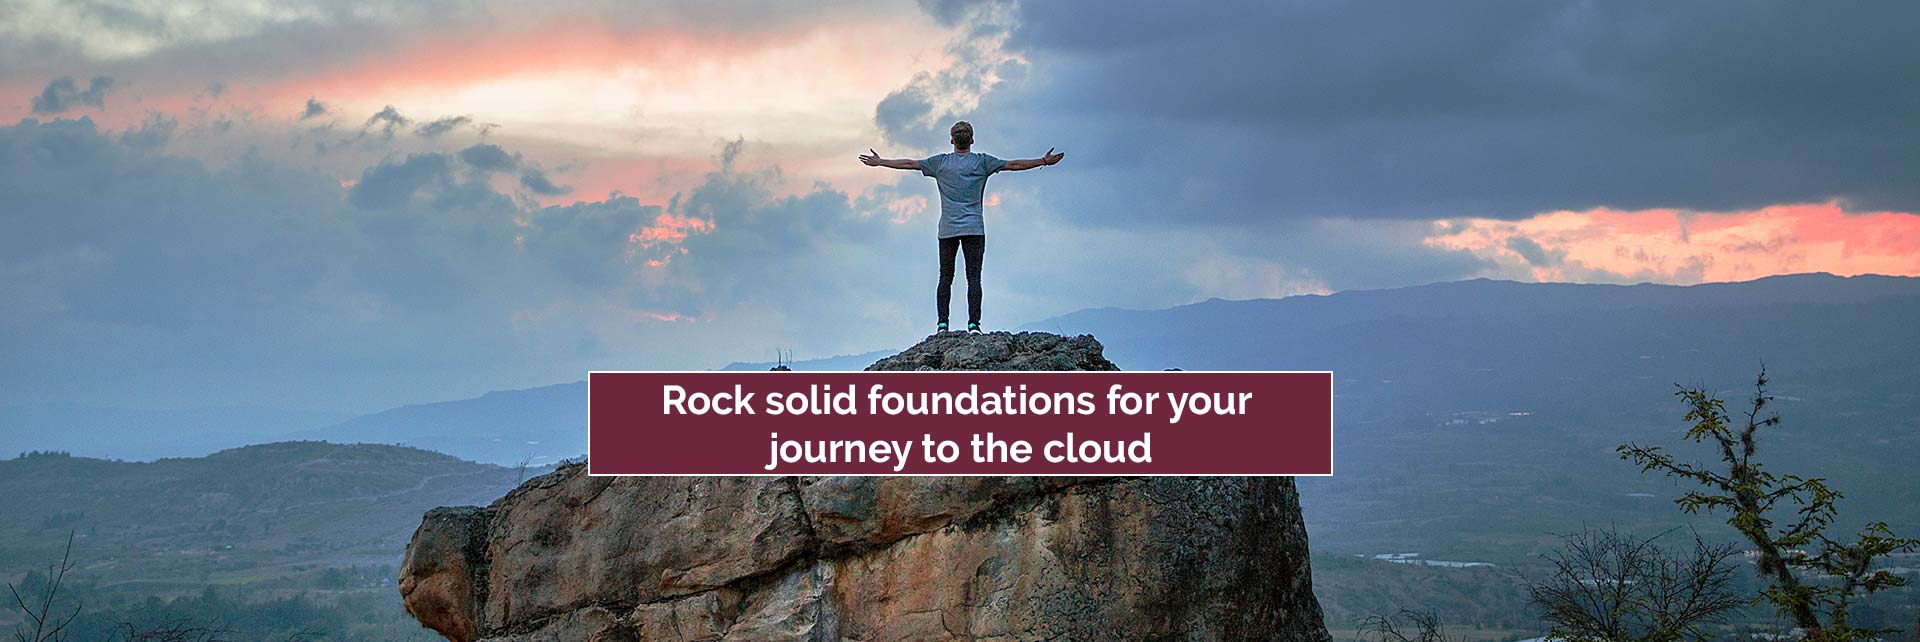 Rock solid foundations for your journey to the cloud